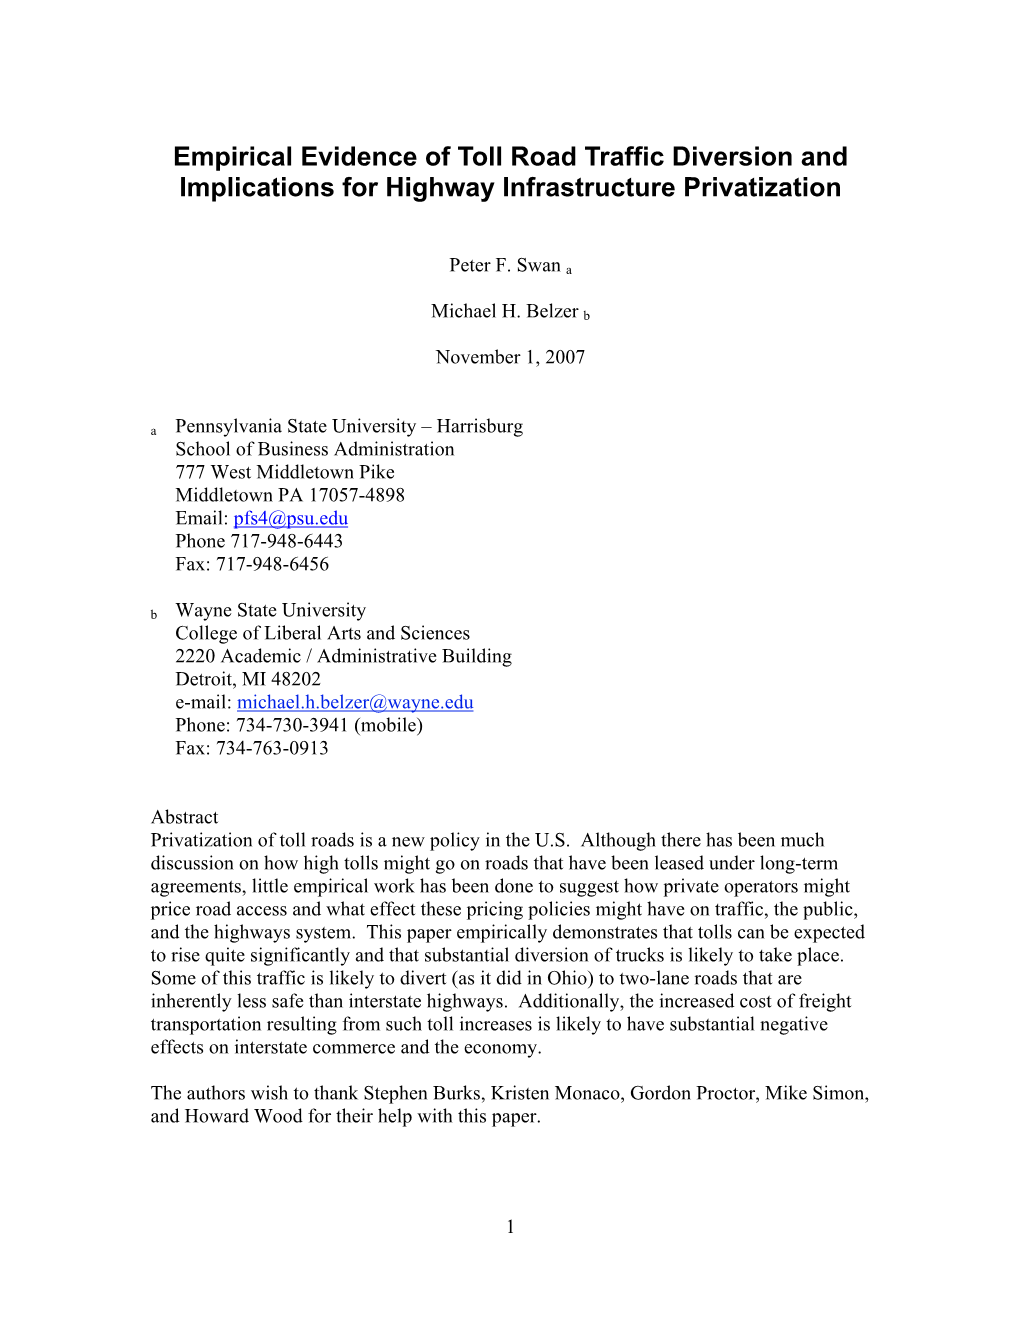 Empirical Evidence of Toll Road Traffic Diversion and Implications for Highway Infrastructure Privatization